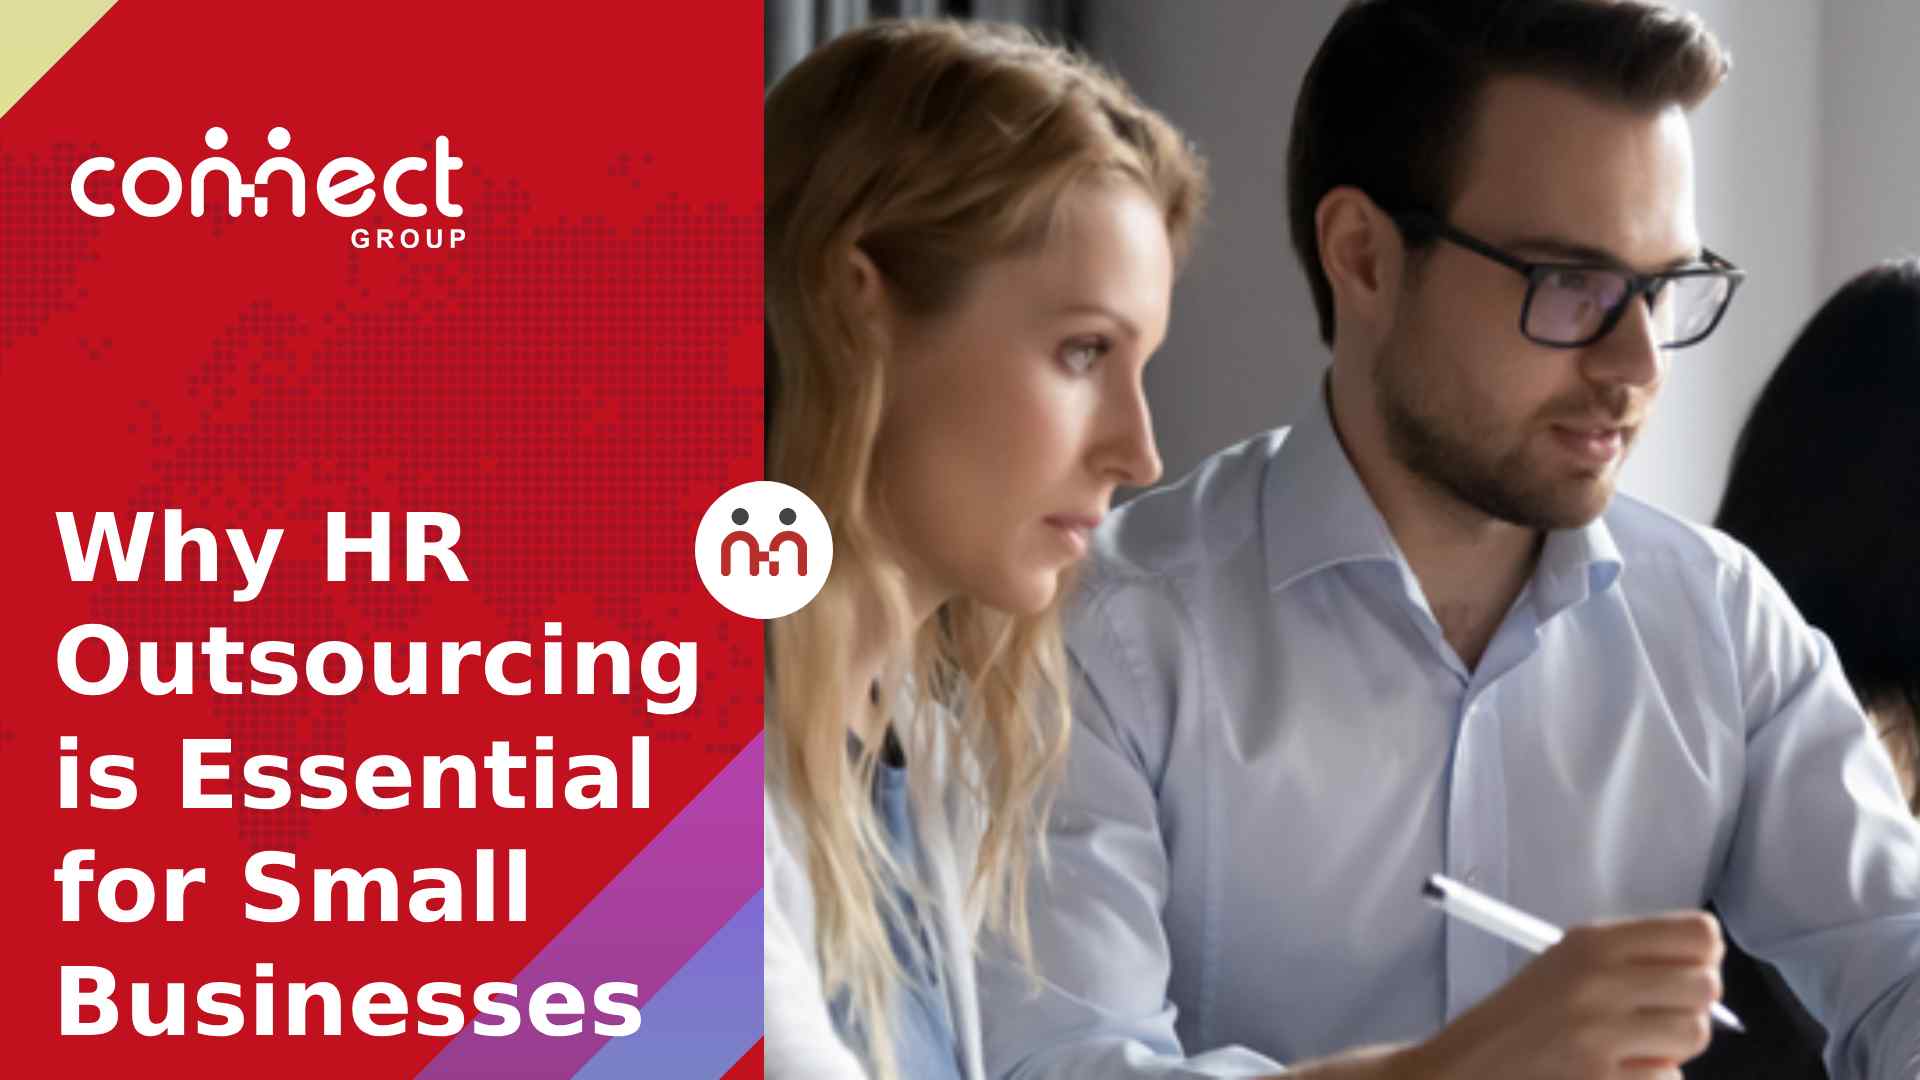 Why HR Outsourcing is Essential for Small Businesses